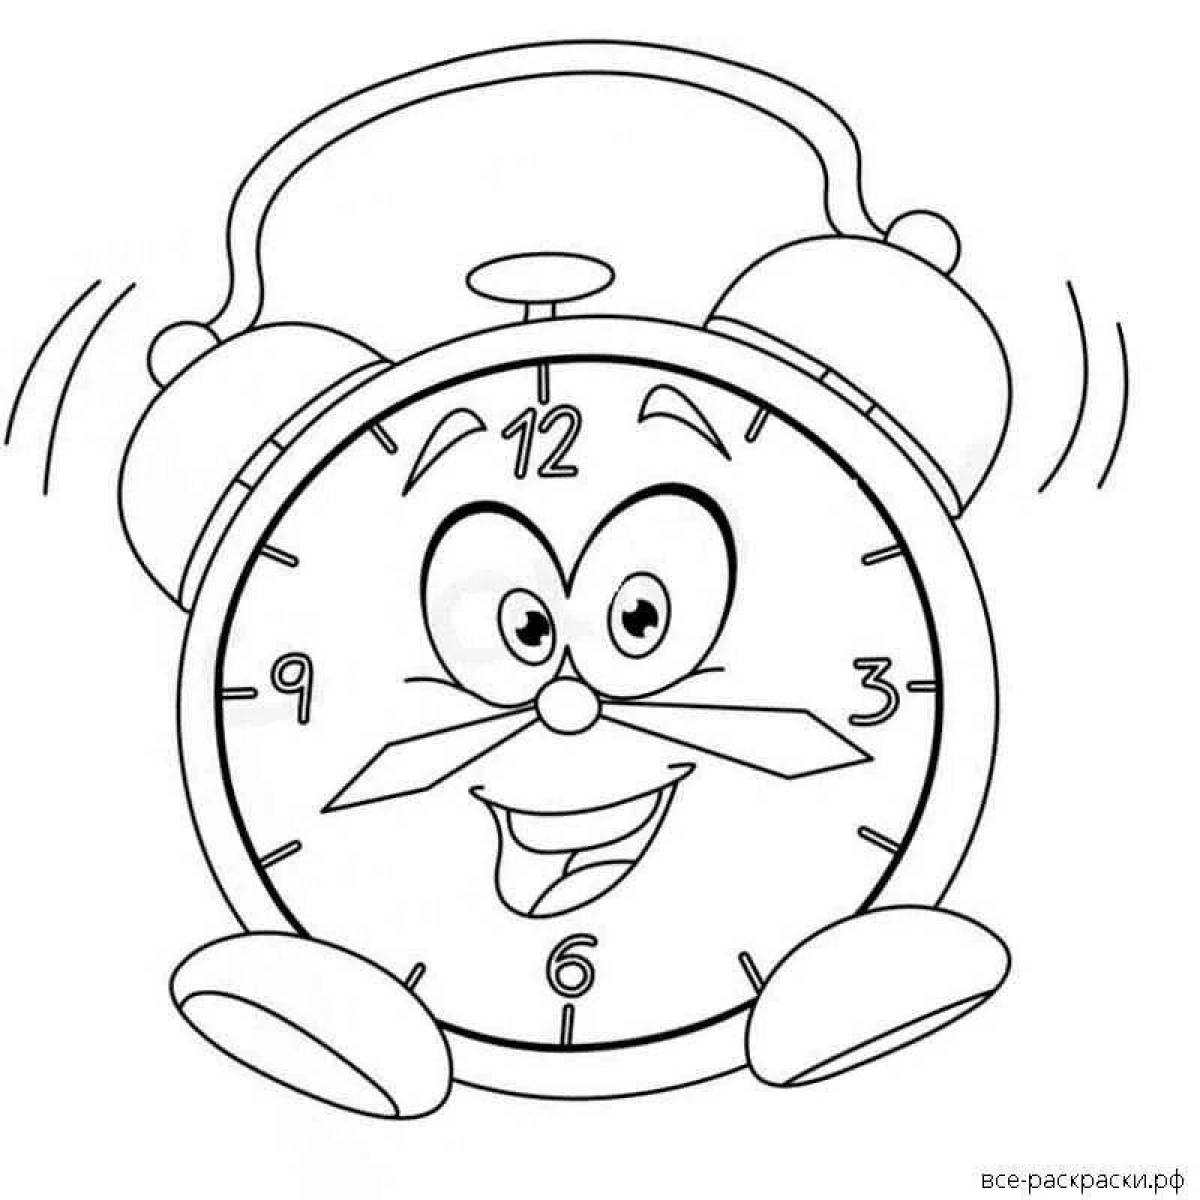 Radiant coloring page watch